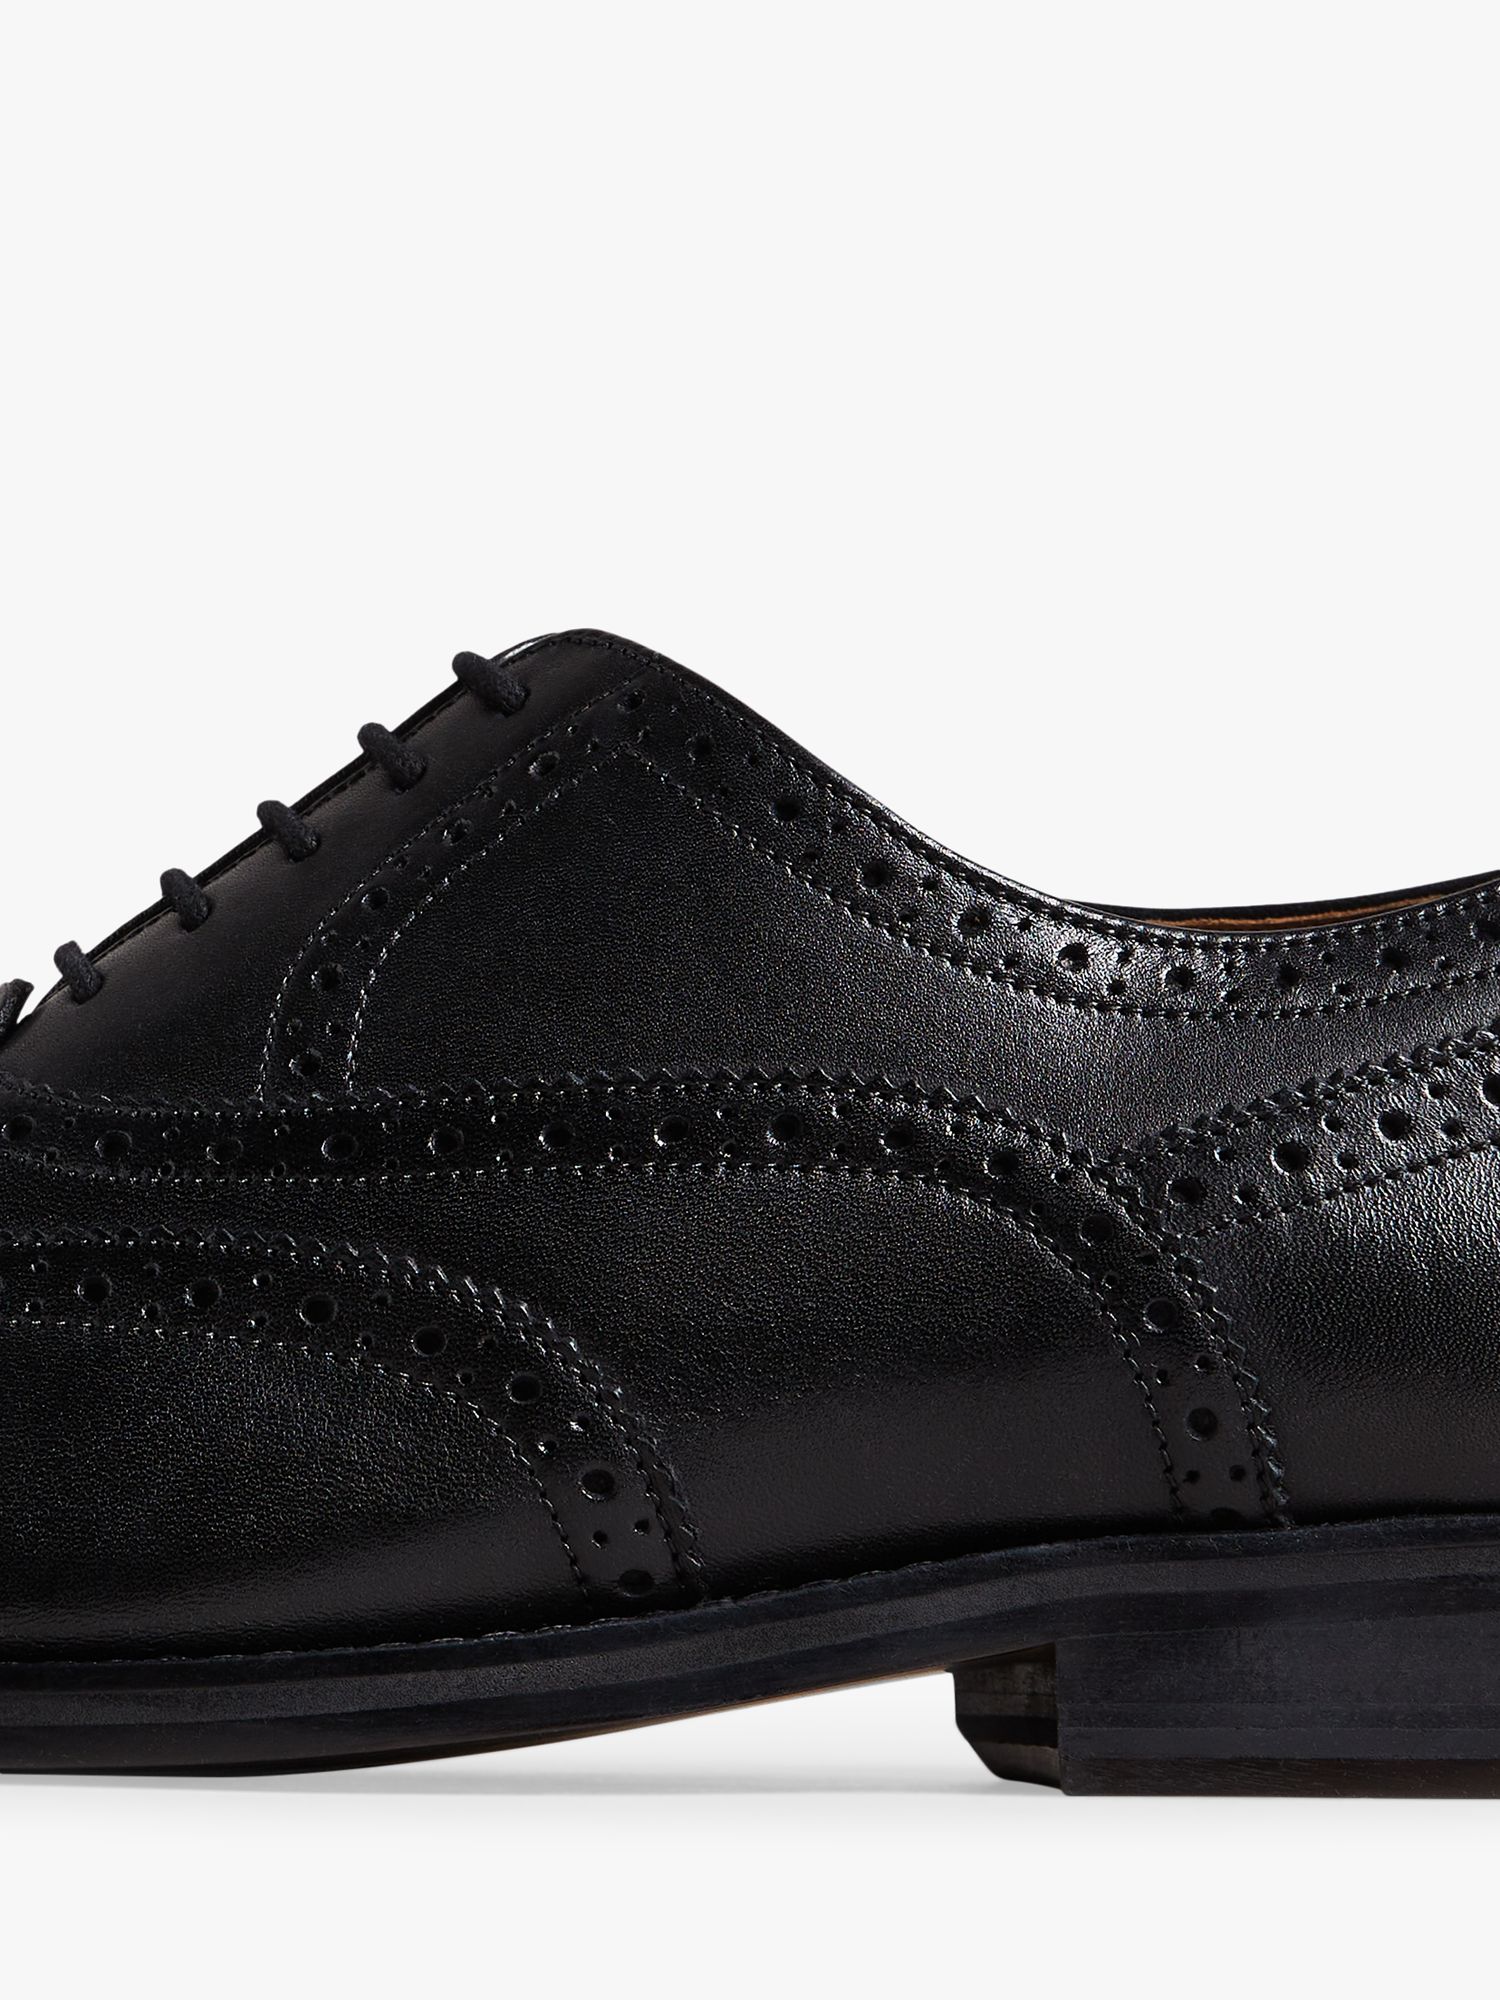 Ted Baker Amaiss Leather Brogues, Black, 7